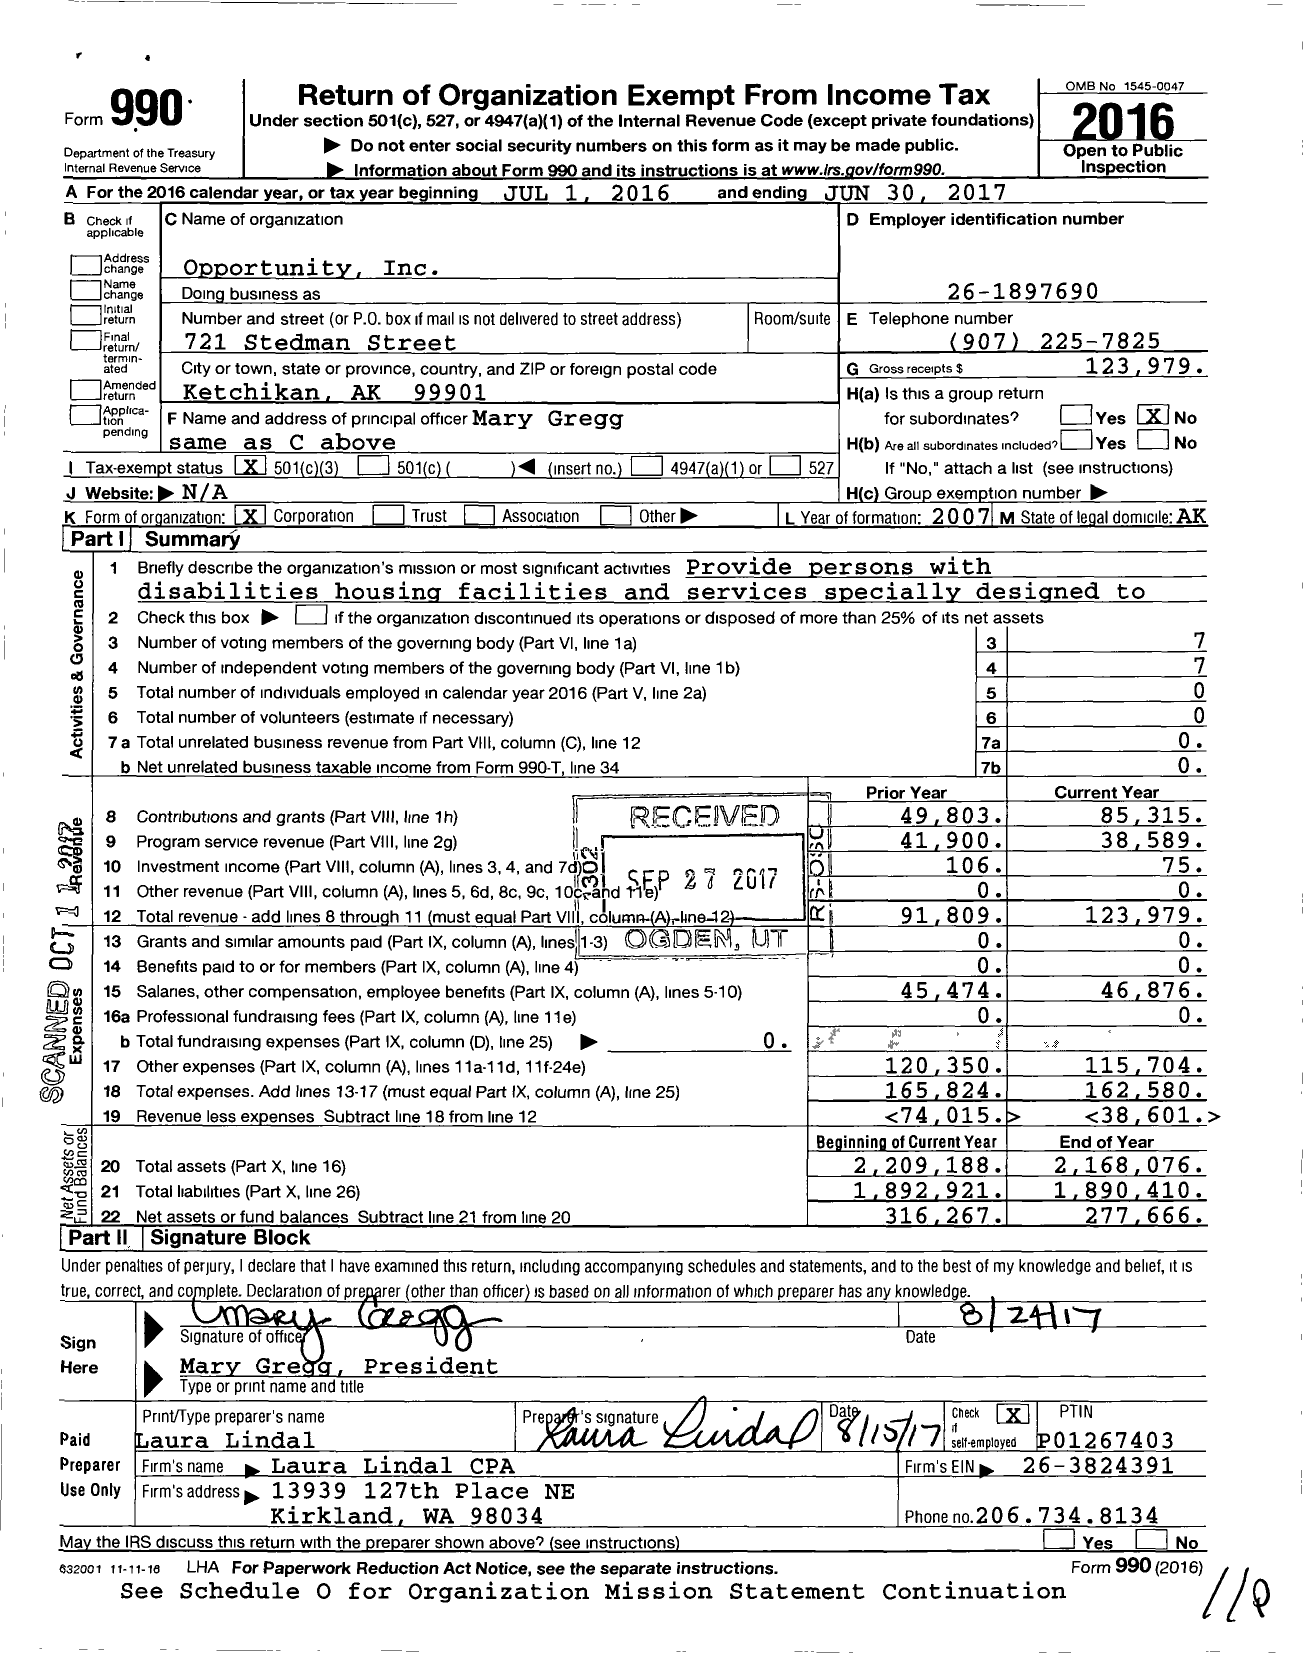 Image of first page of 2016 Form 990 for Opportunity